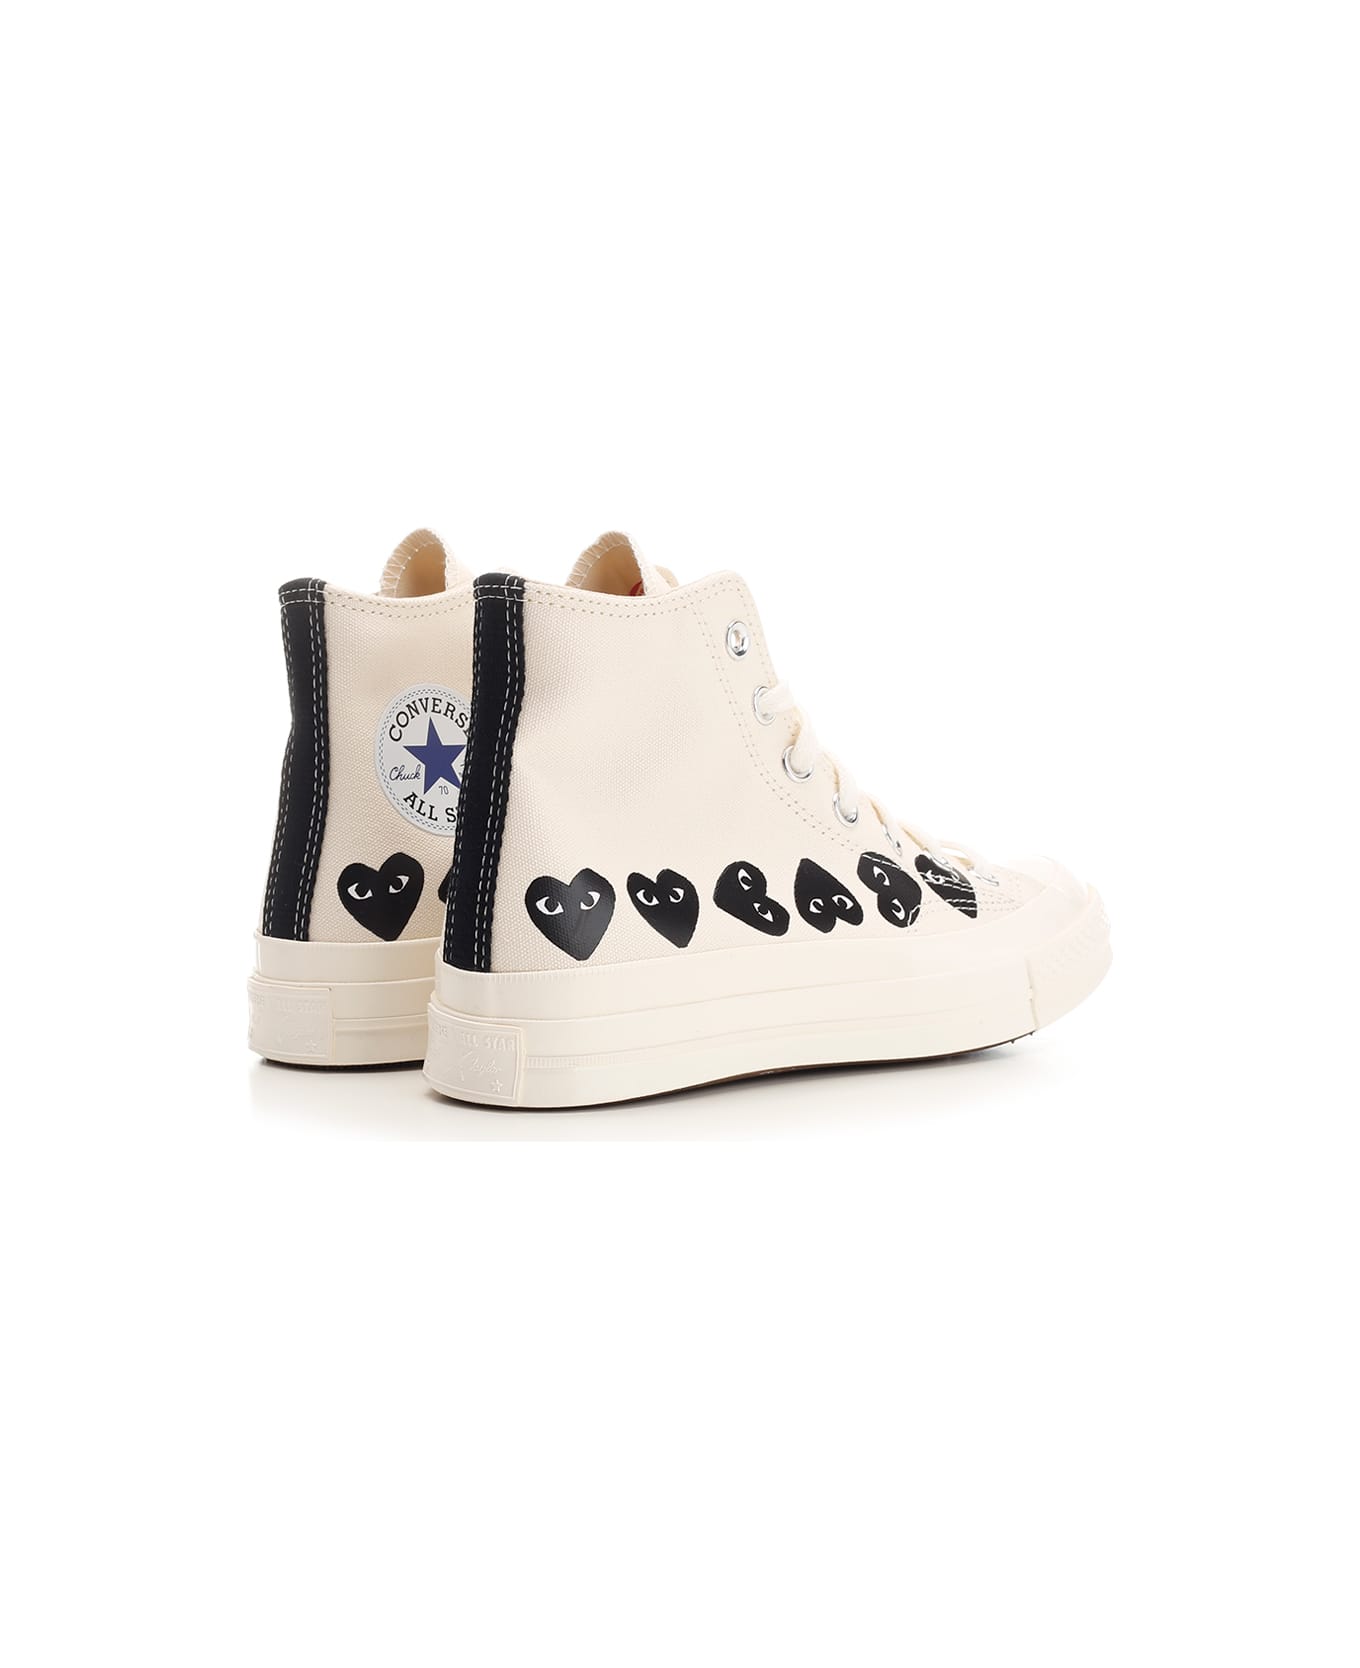 Comme des Garçons Play Ivory "chuck Taylor" High Top Sneakers - White